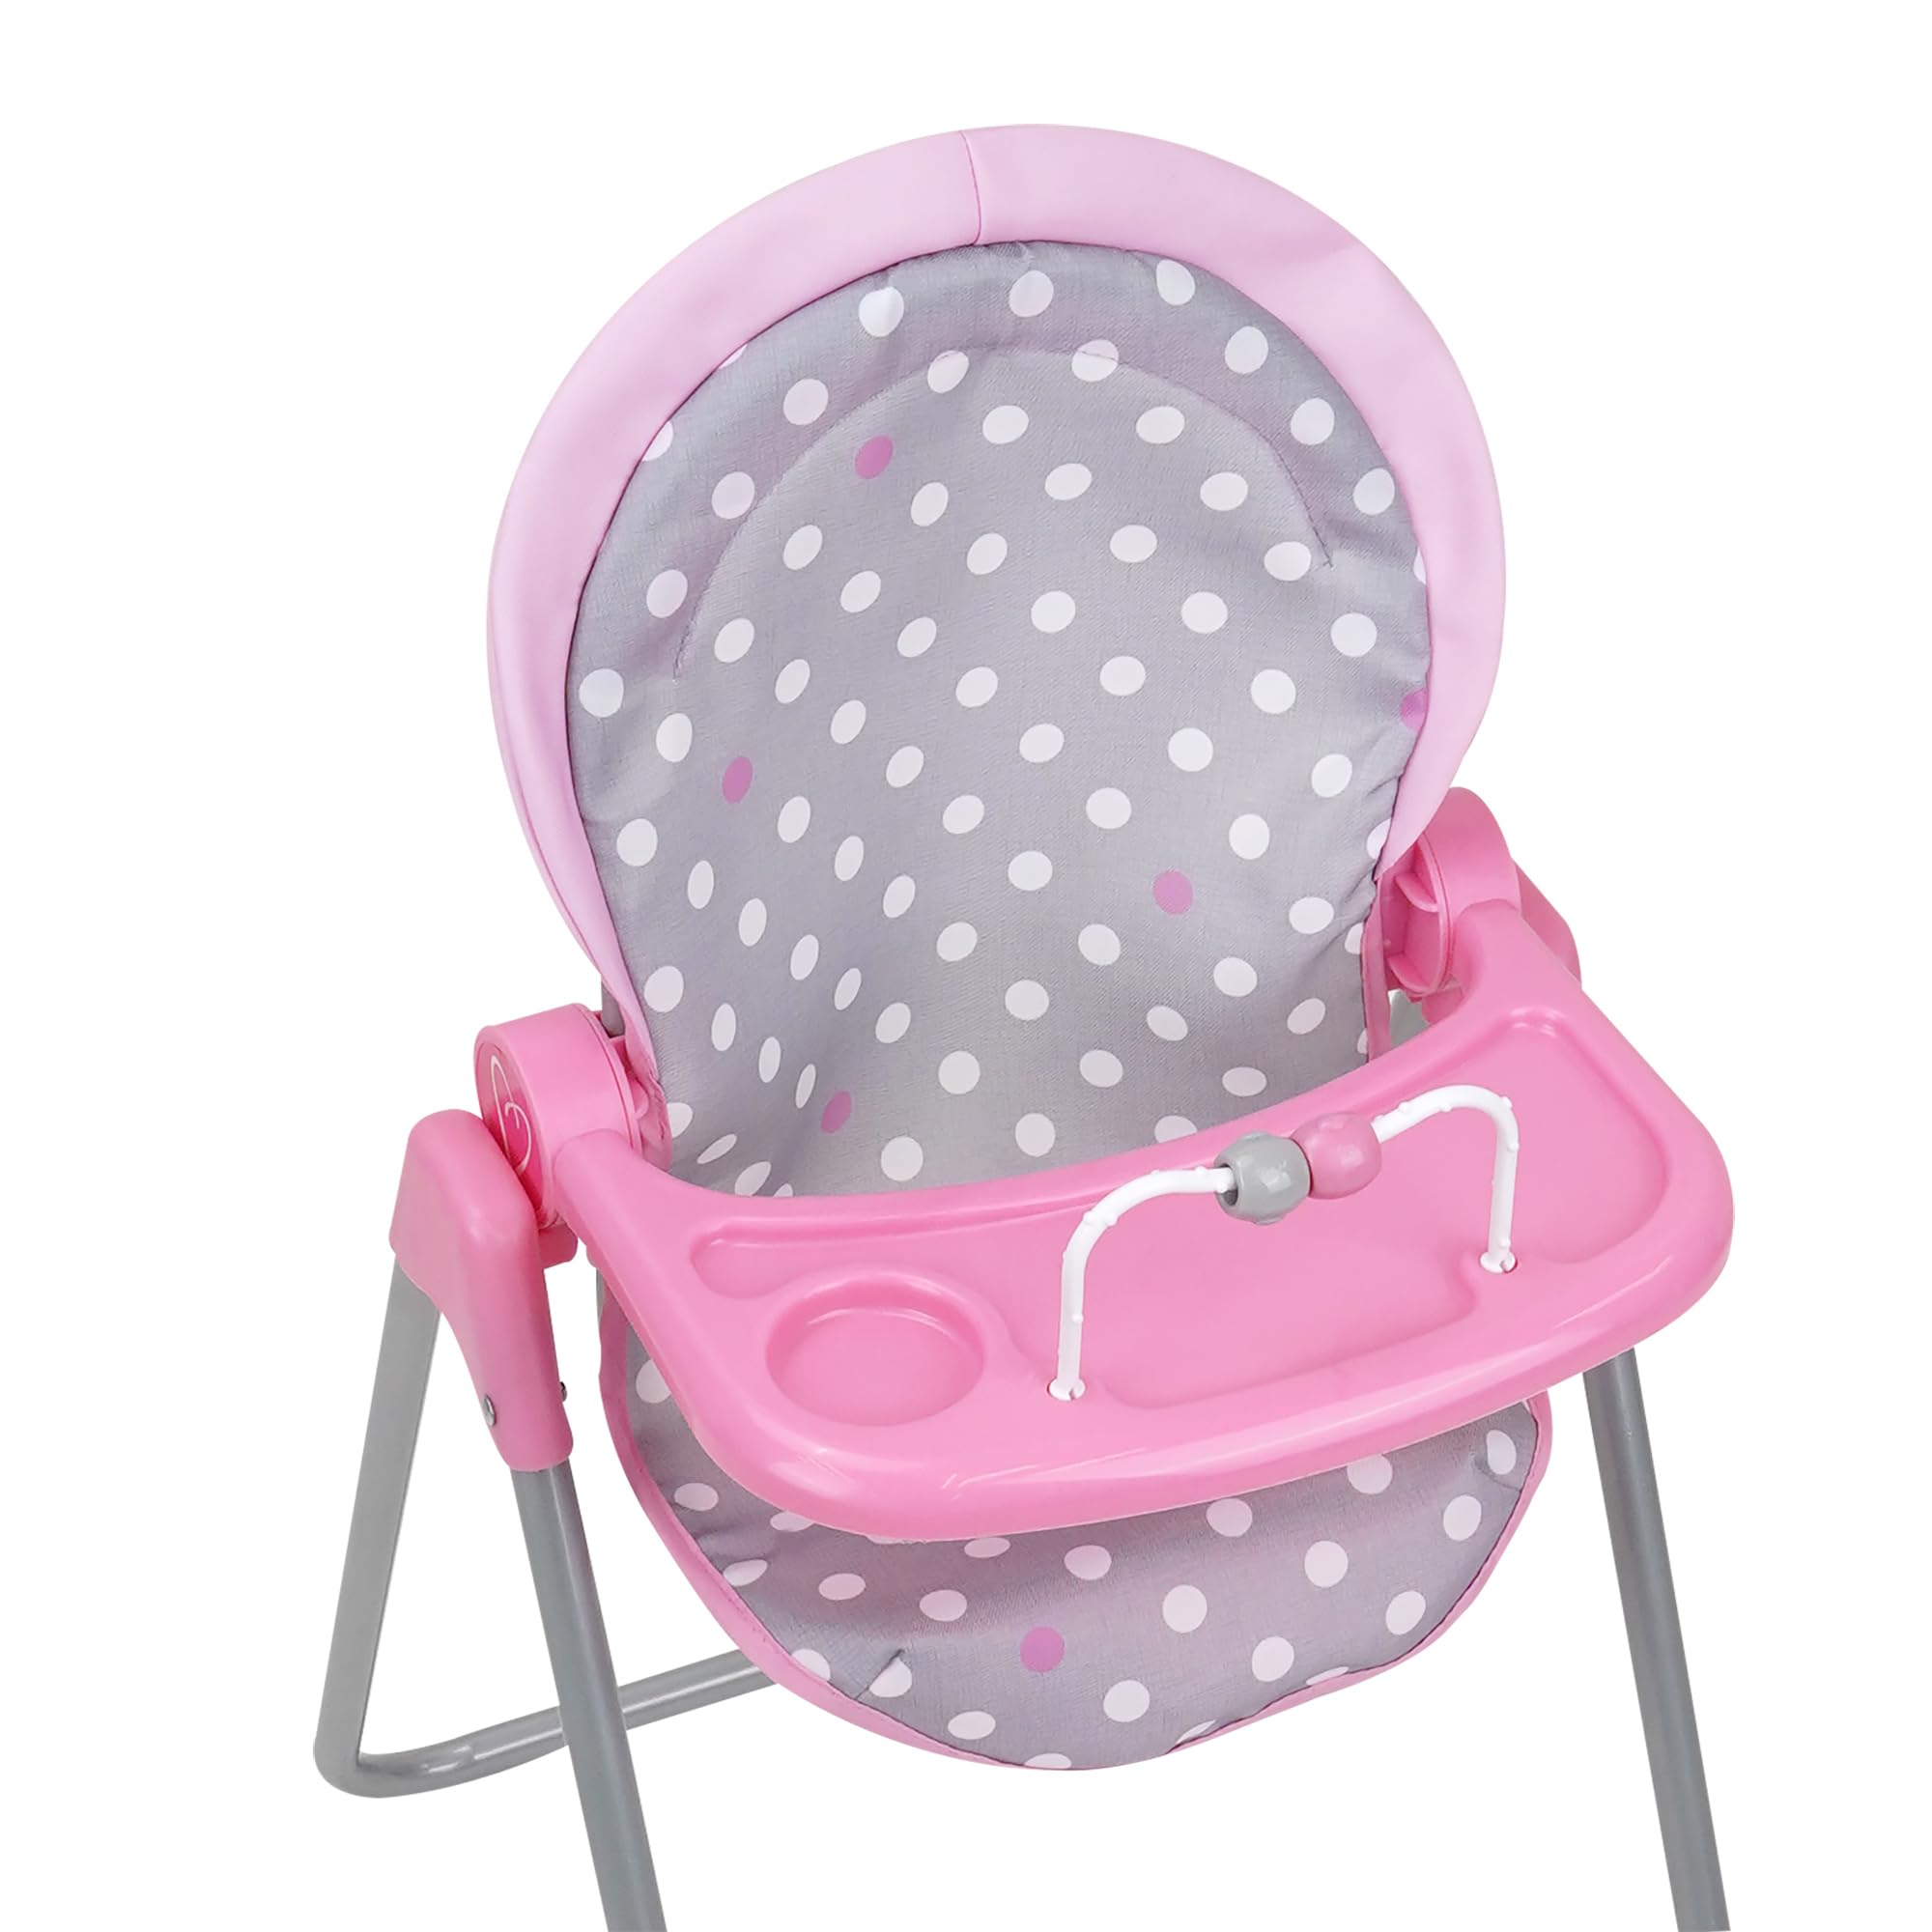 509 Crew: Cotton Candy Pink: Foodie Doll Highchair - Pink, Grey, Polka Dot - for Dolls Up to 21